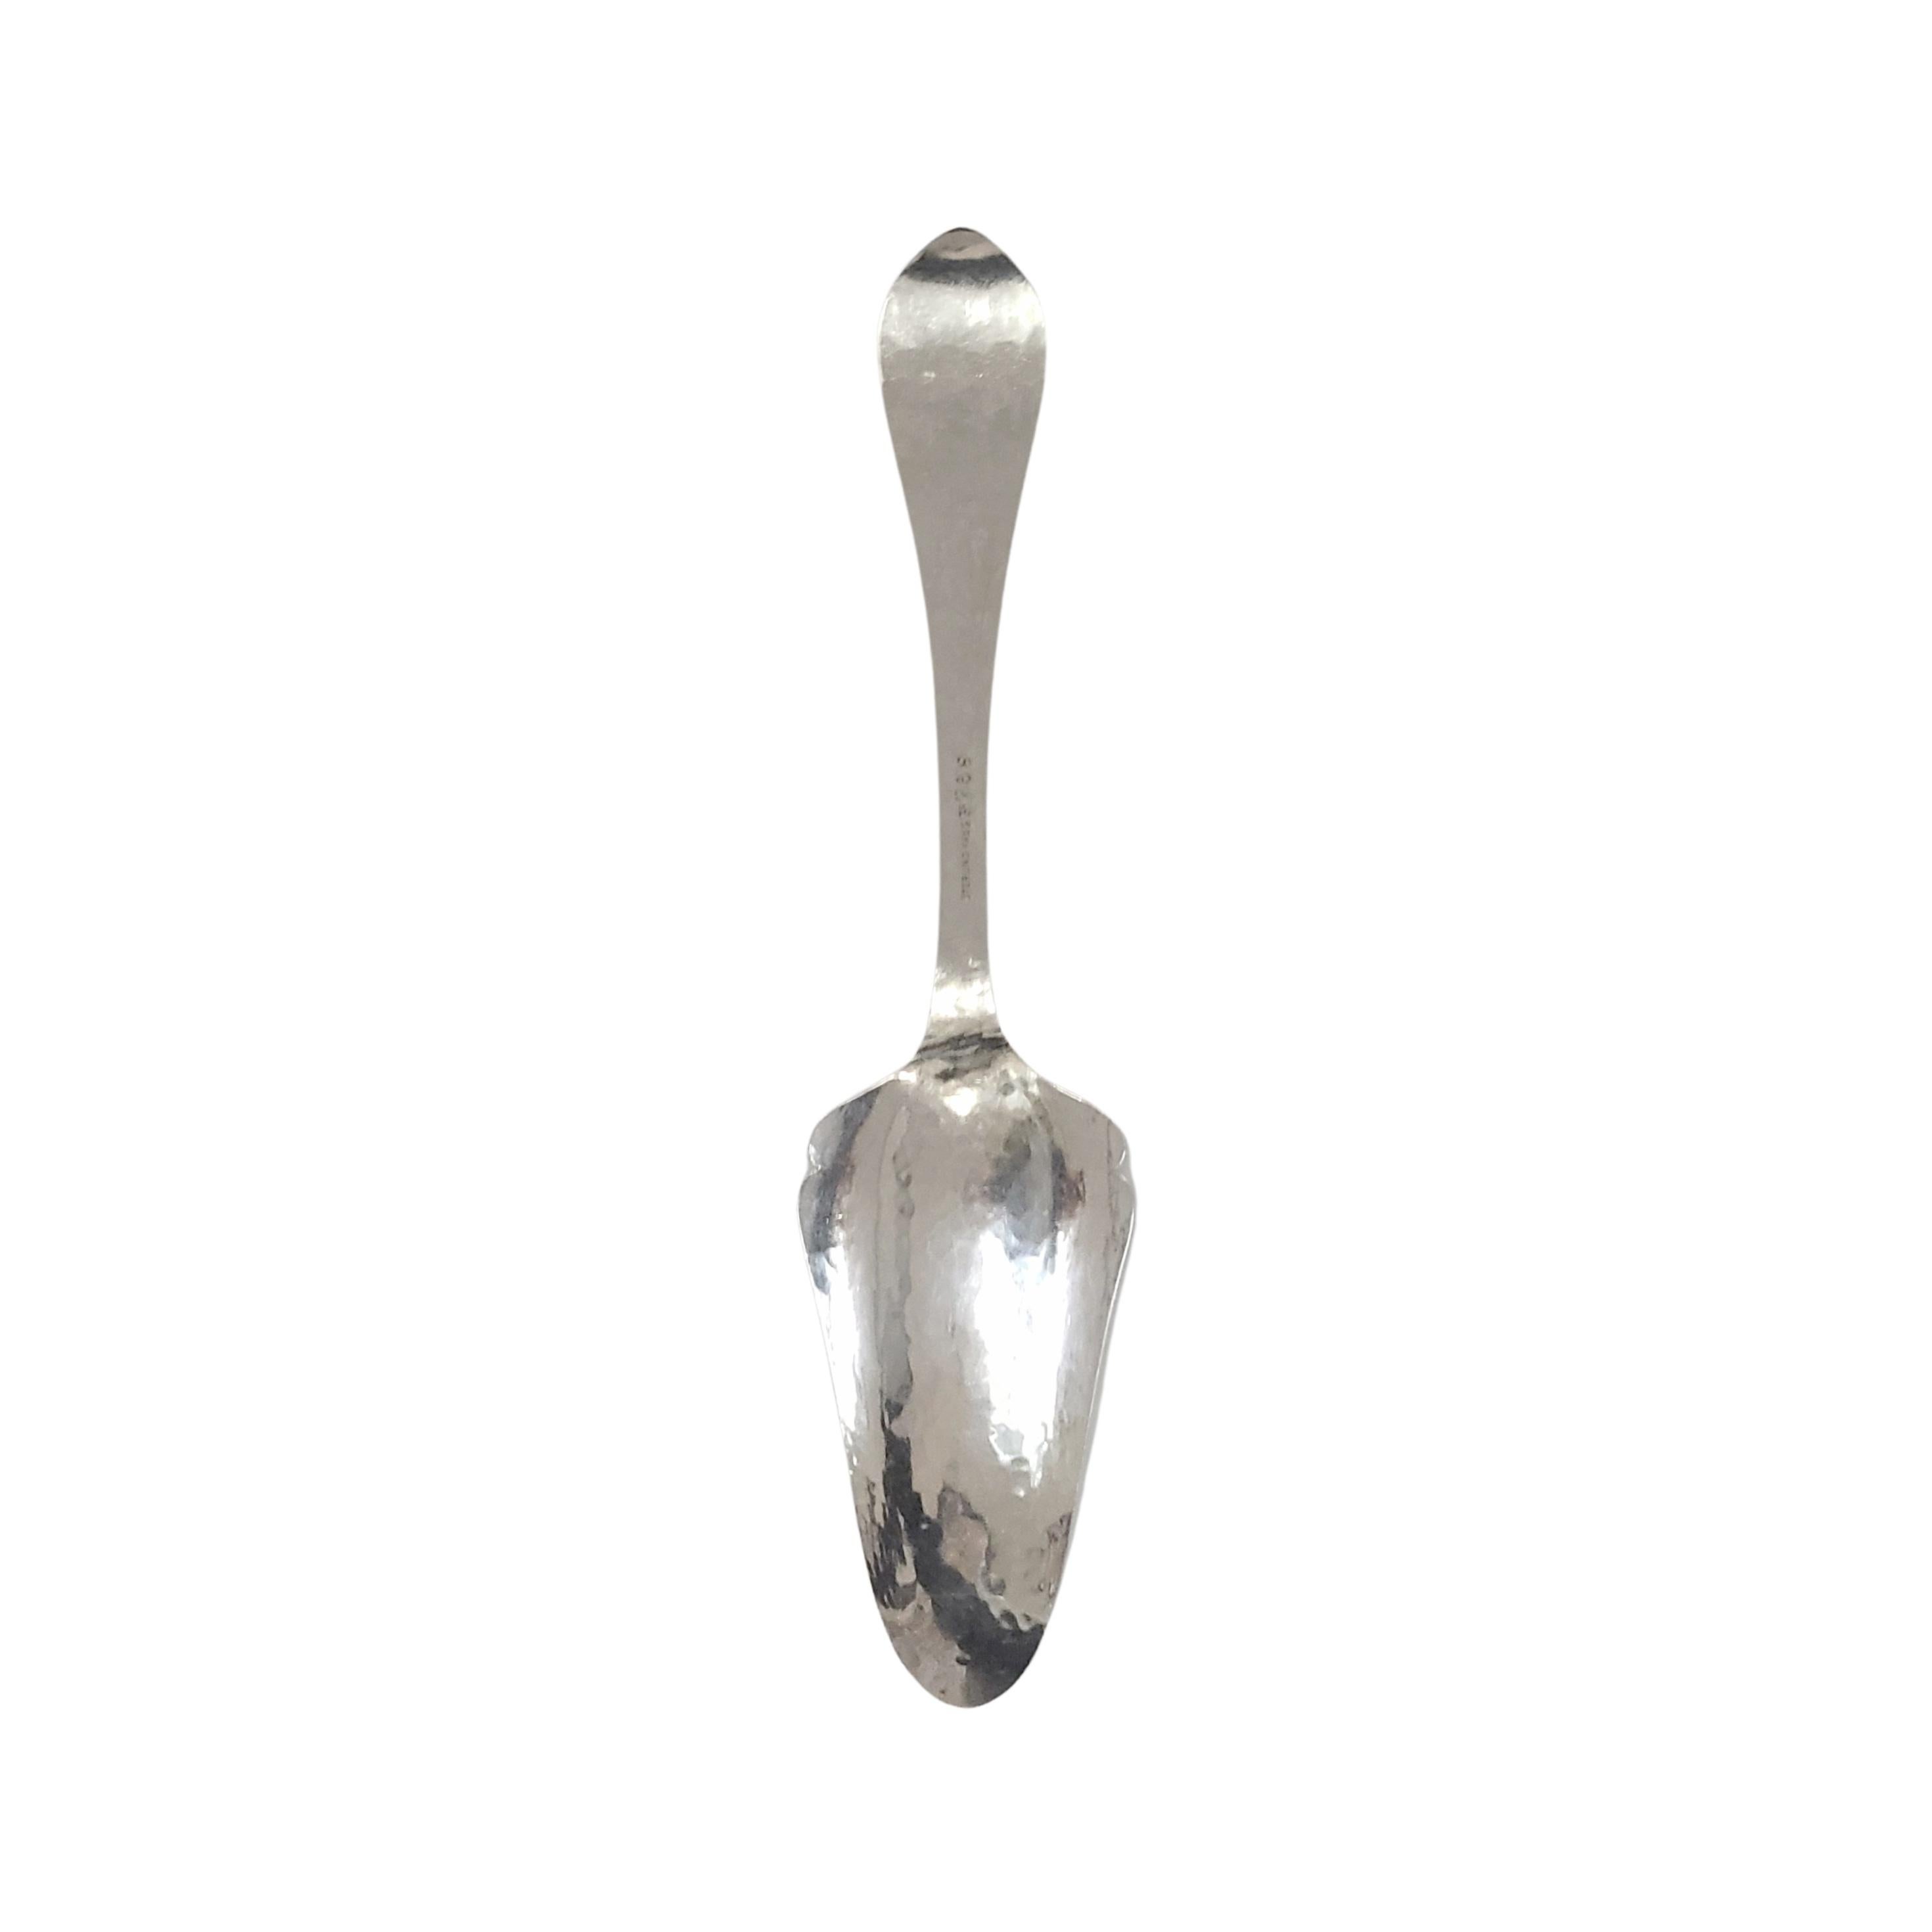 Hammered sterling silver jelly/pie server by The Kalo Shop.

No monogram

The Kalo Shop began producing handwrought objects in Chicago in 1900. Hallmark dates this piece to the early 1900s. It features a slightly hammered finish.

Measures approx 8